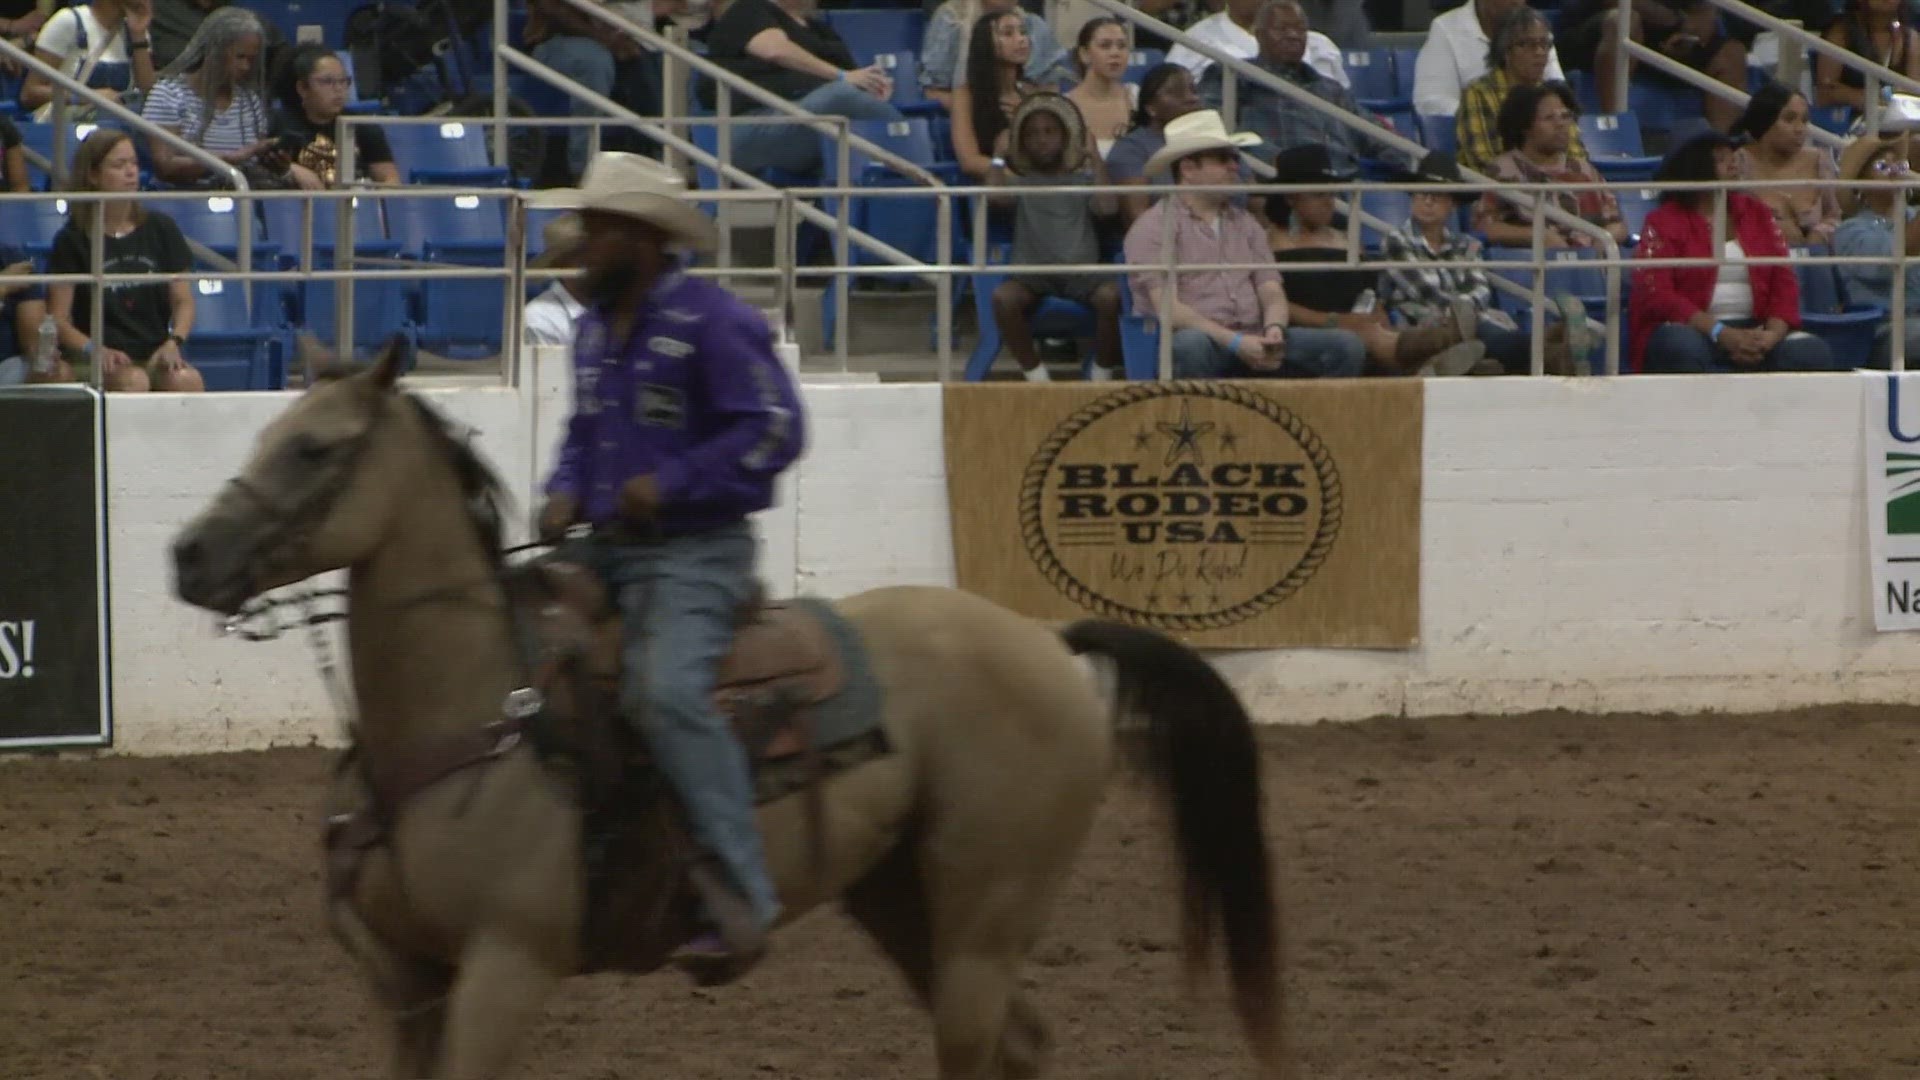 The 2023 Arizona Black Rodeo is at the Westworld of Scottsdale Sept. 1-2.